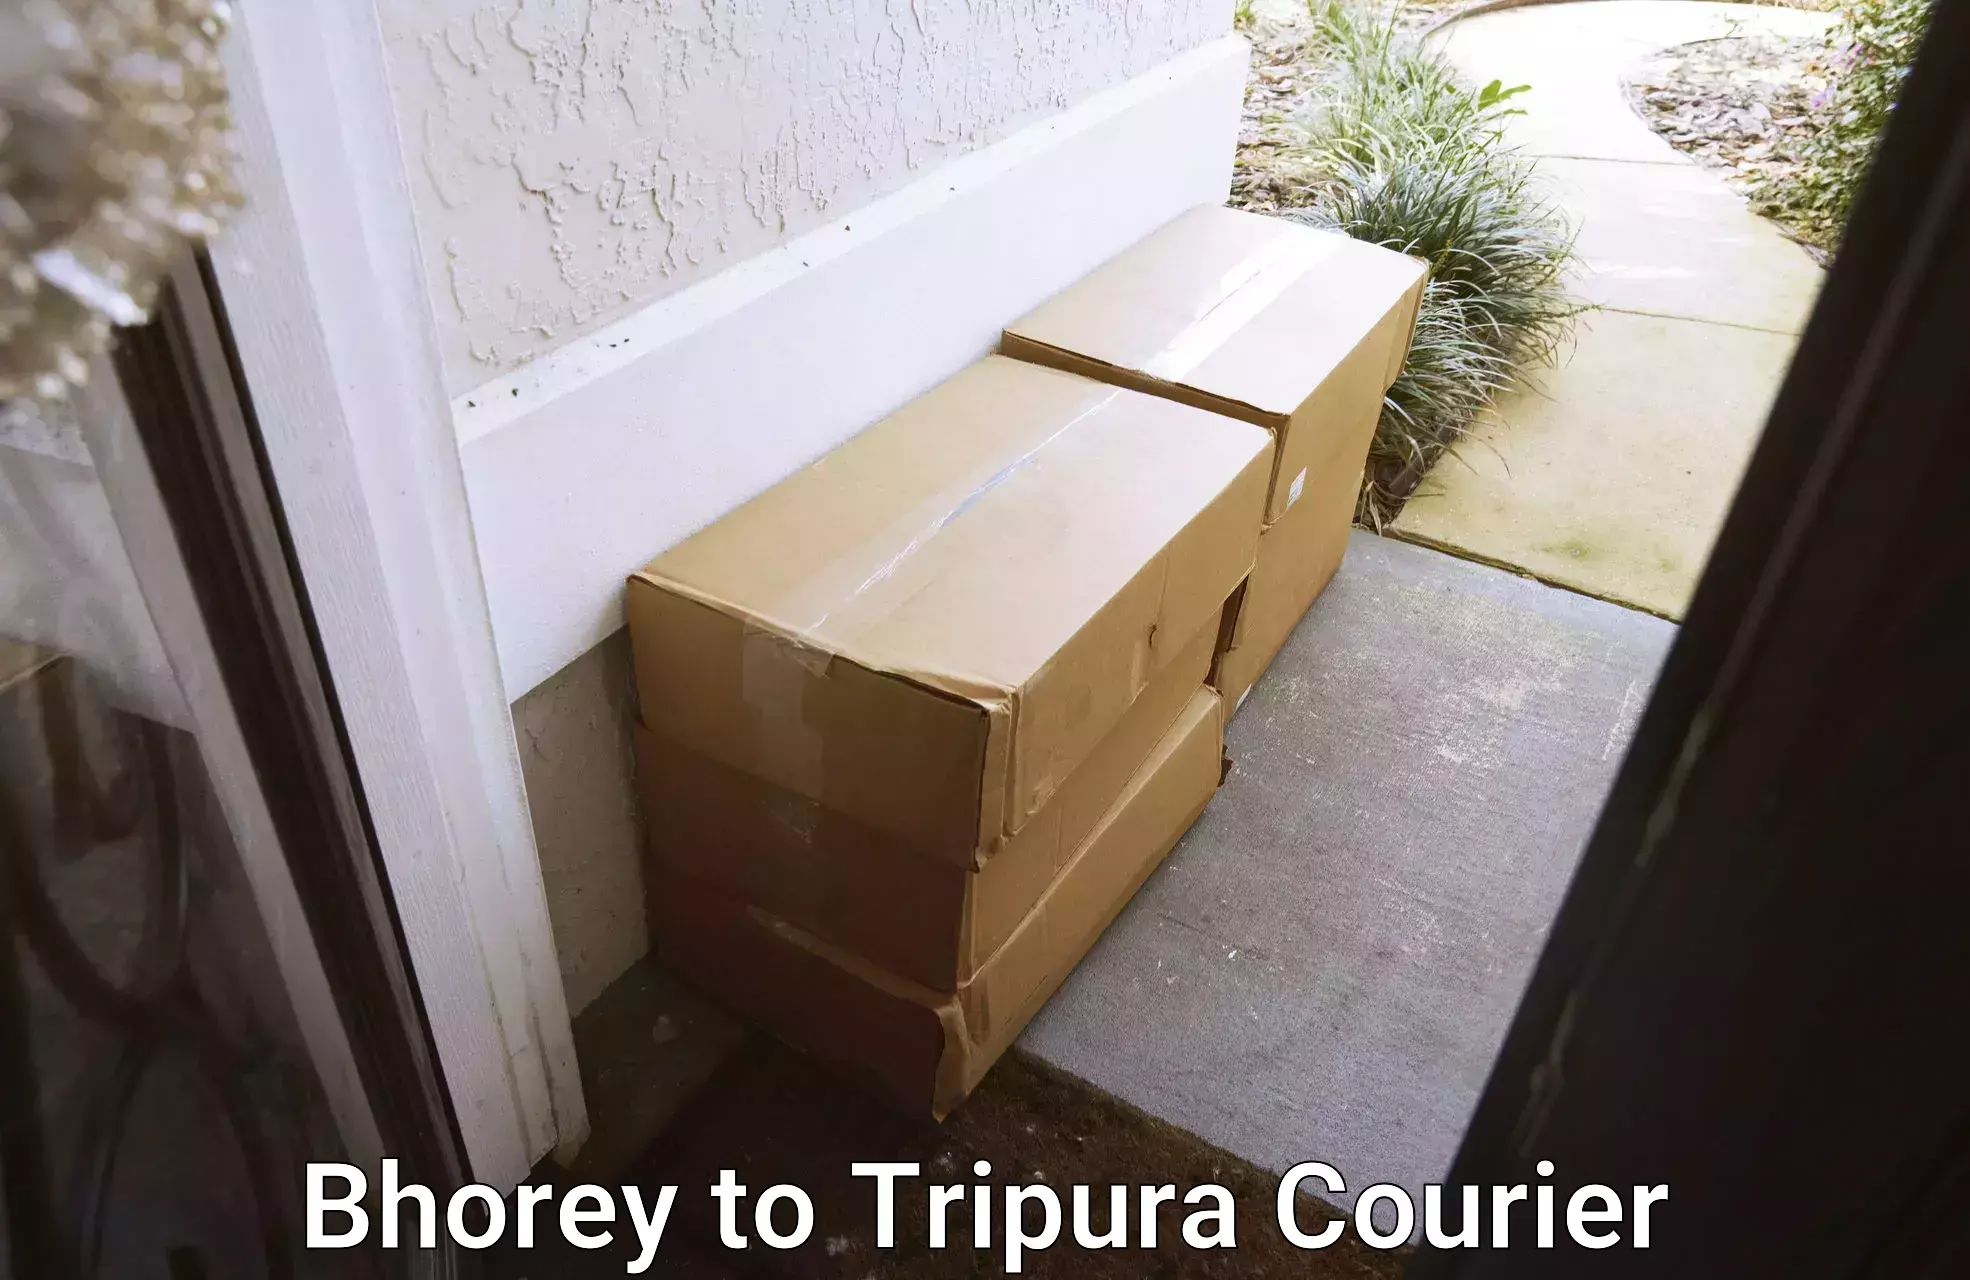 Professional moving assistance Bhorey to Udaipur Tripura